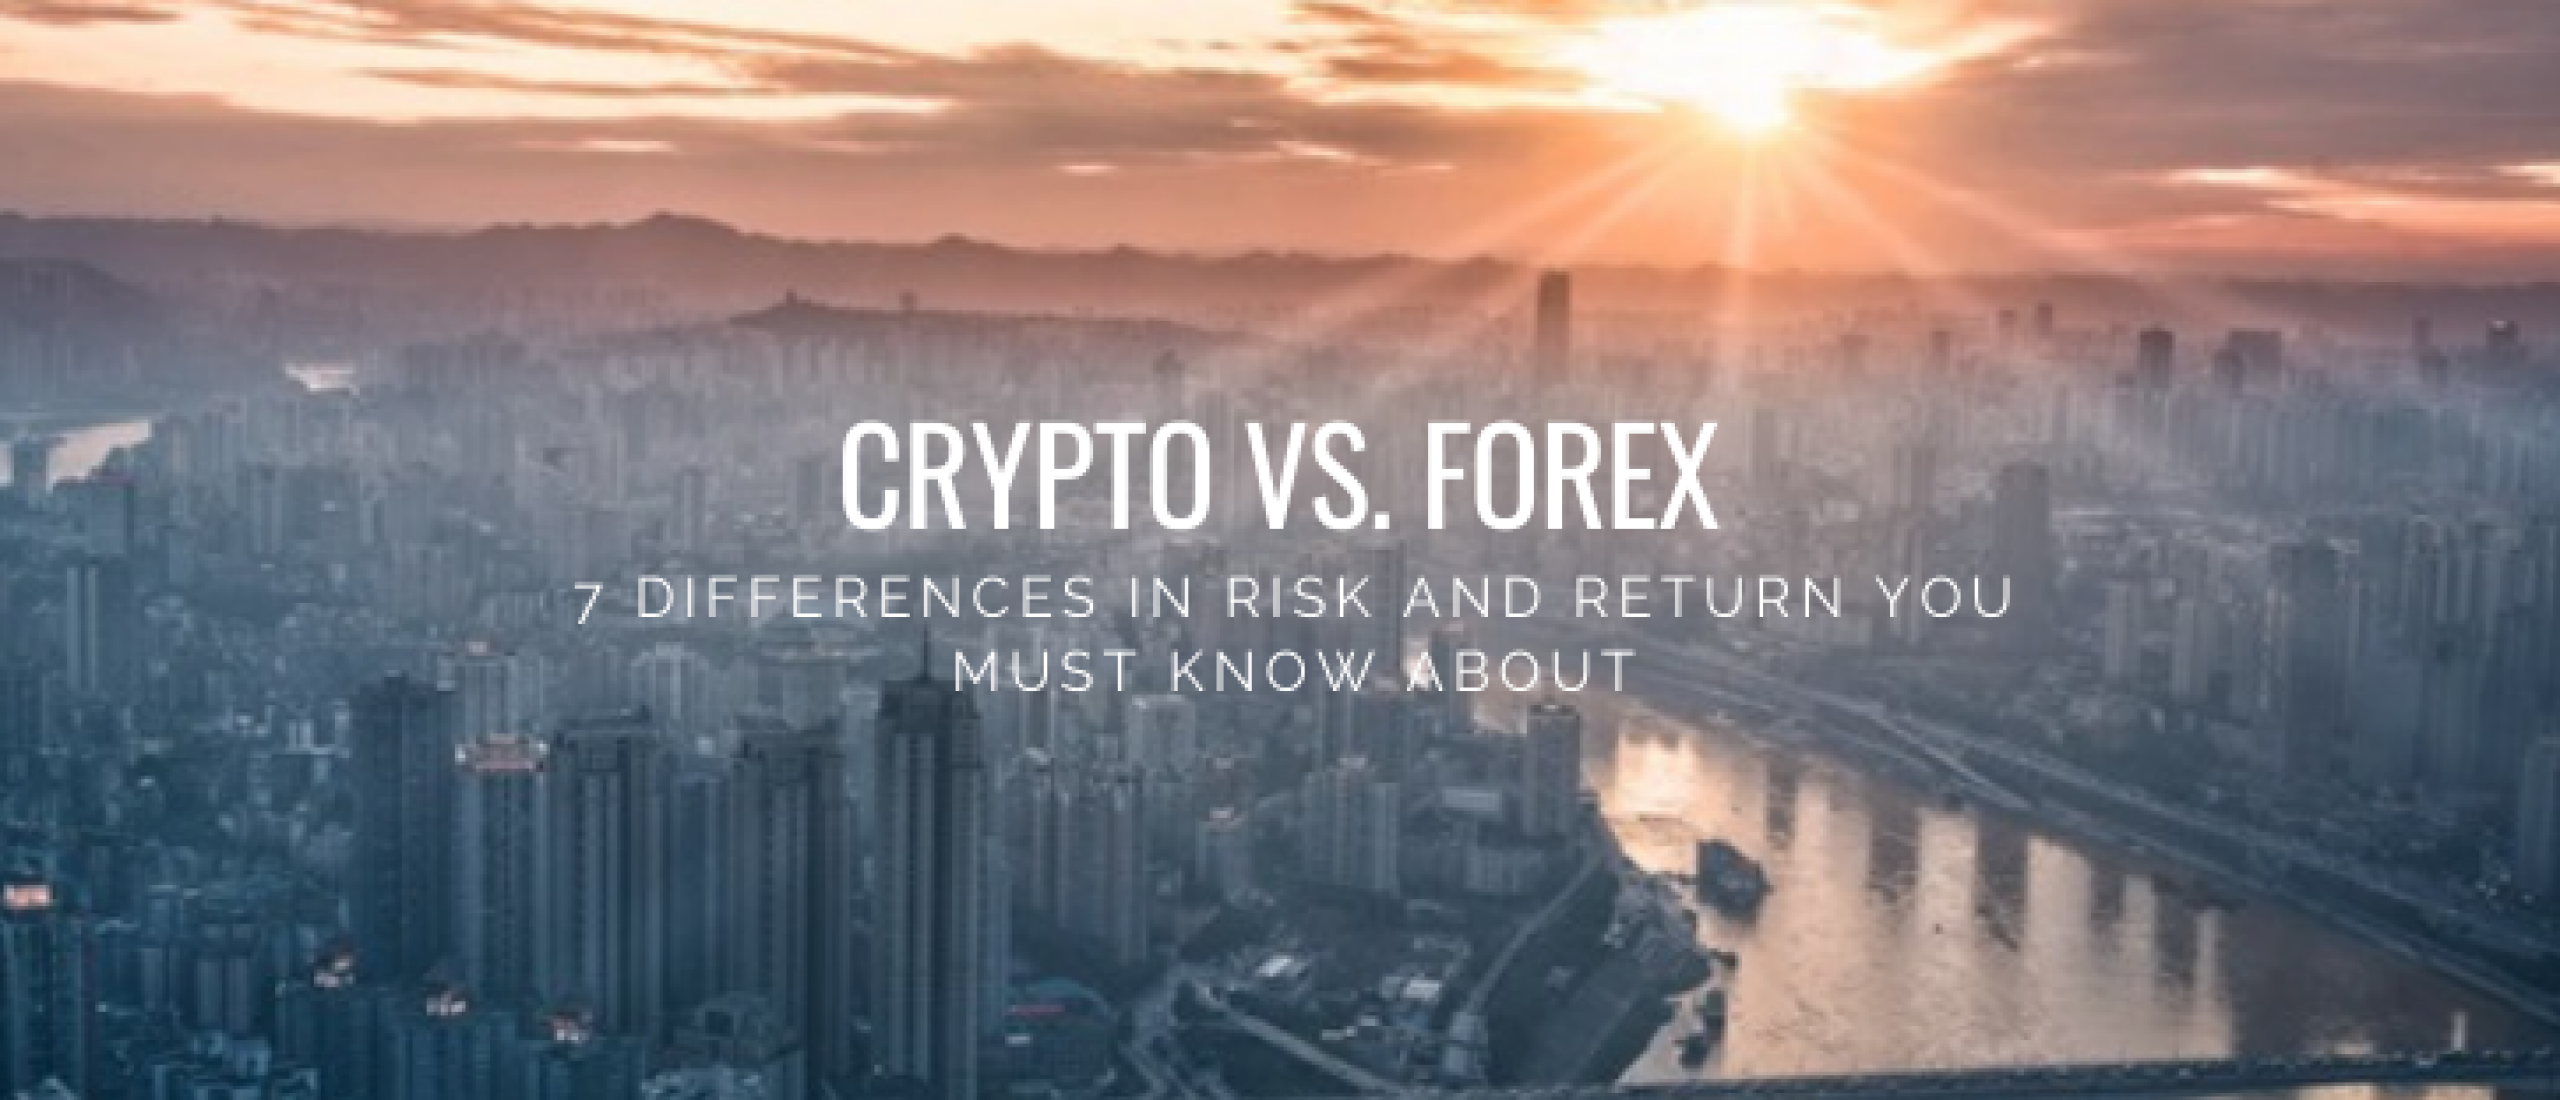 Crypto vs. Forex: 7 Differences Risk and Return